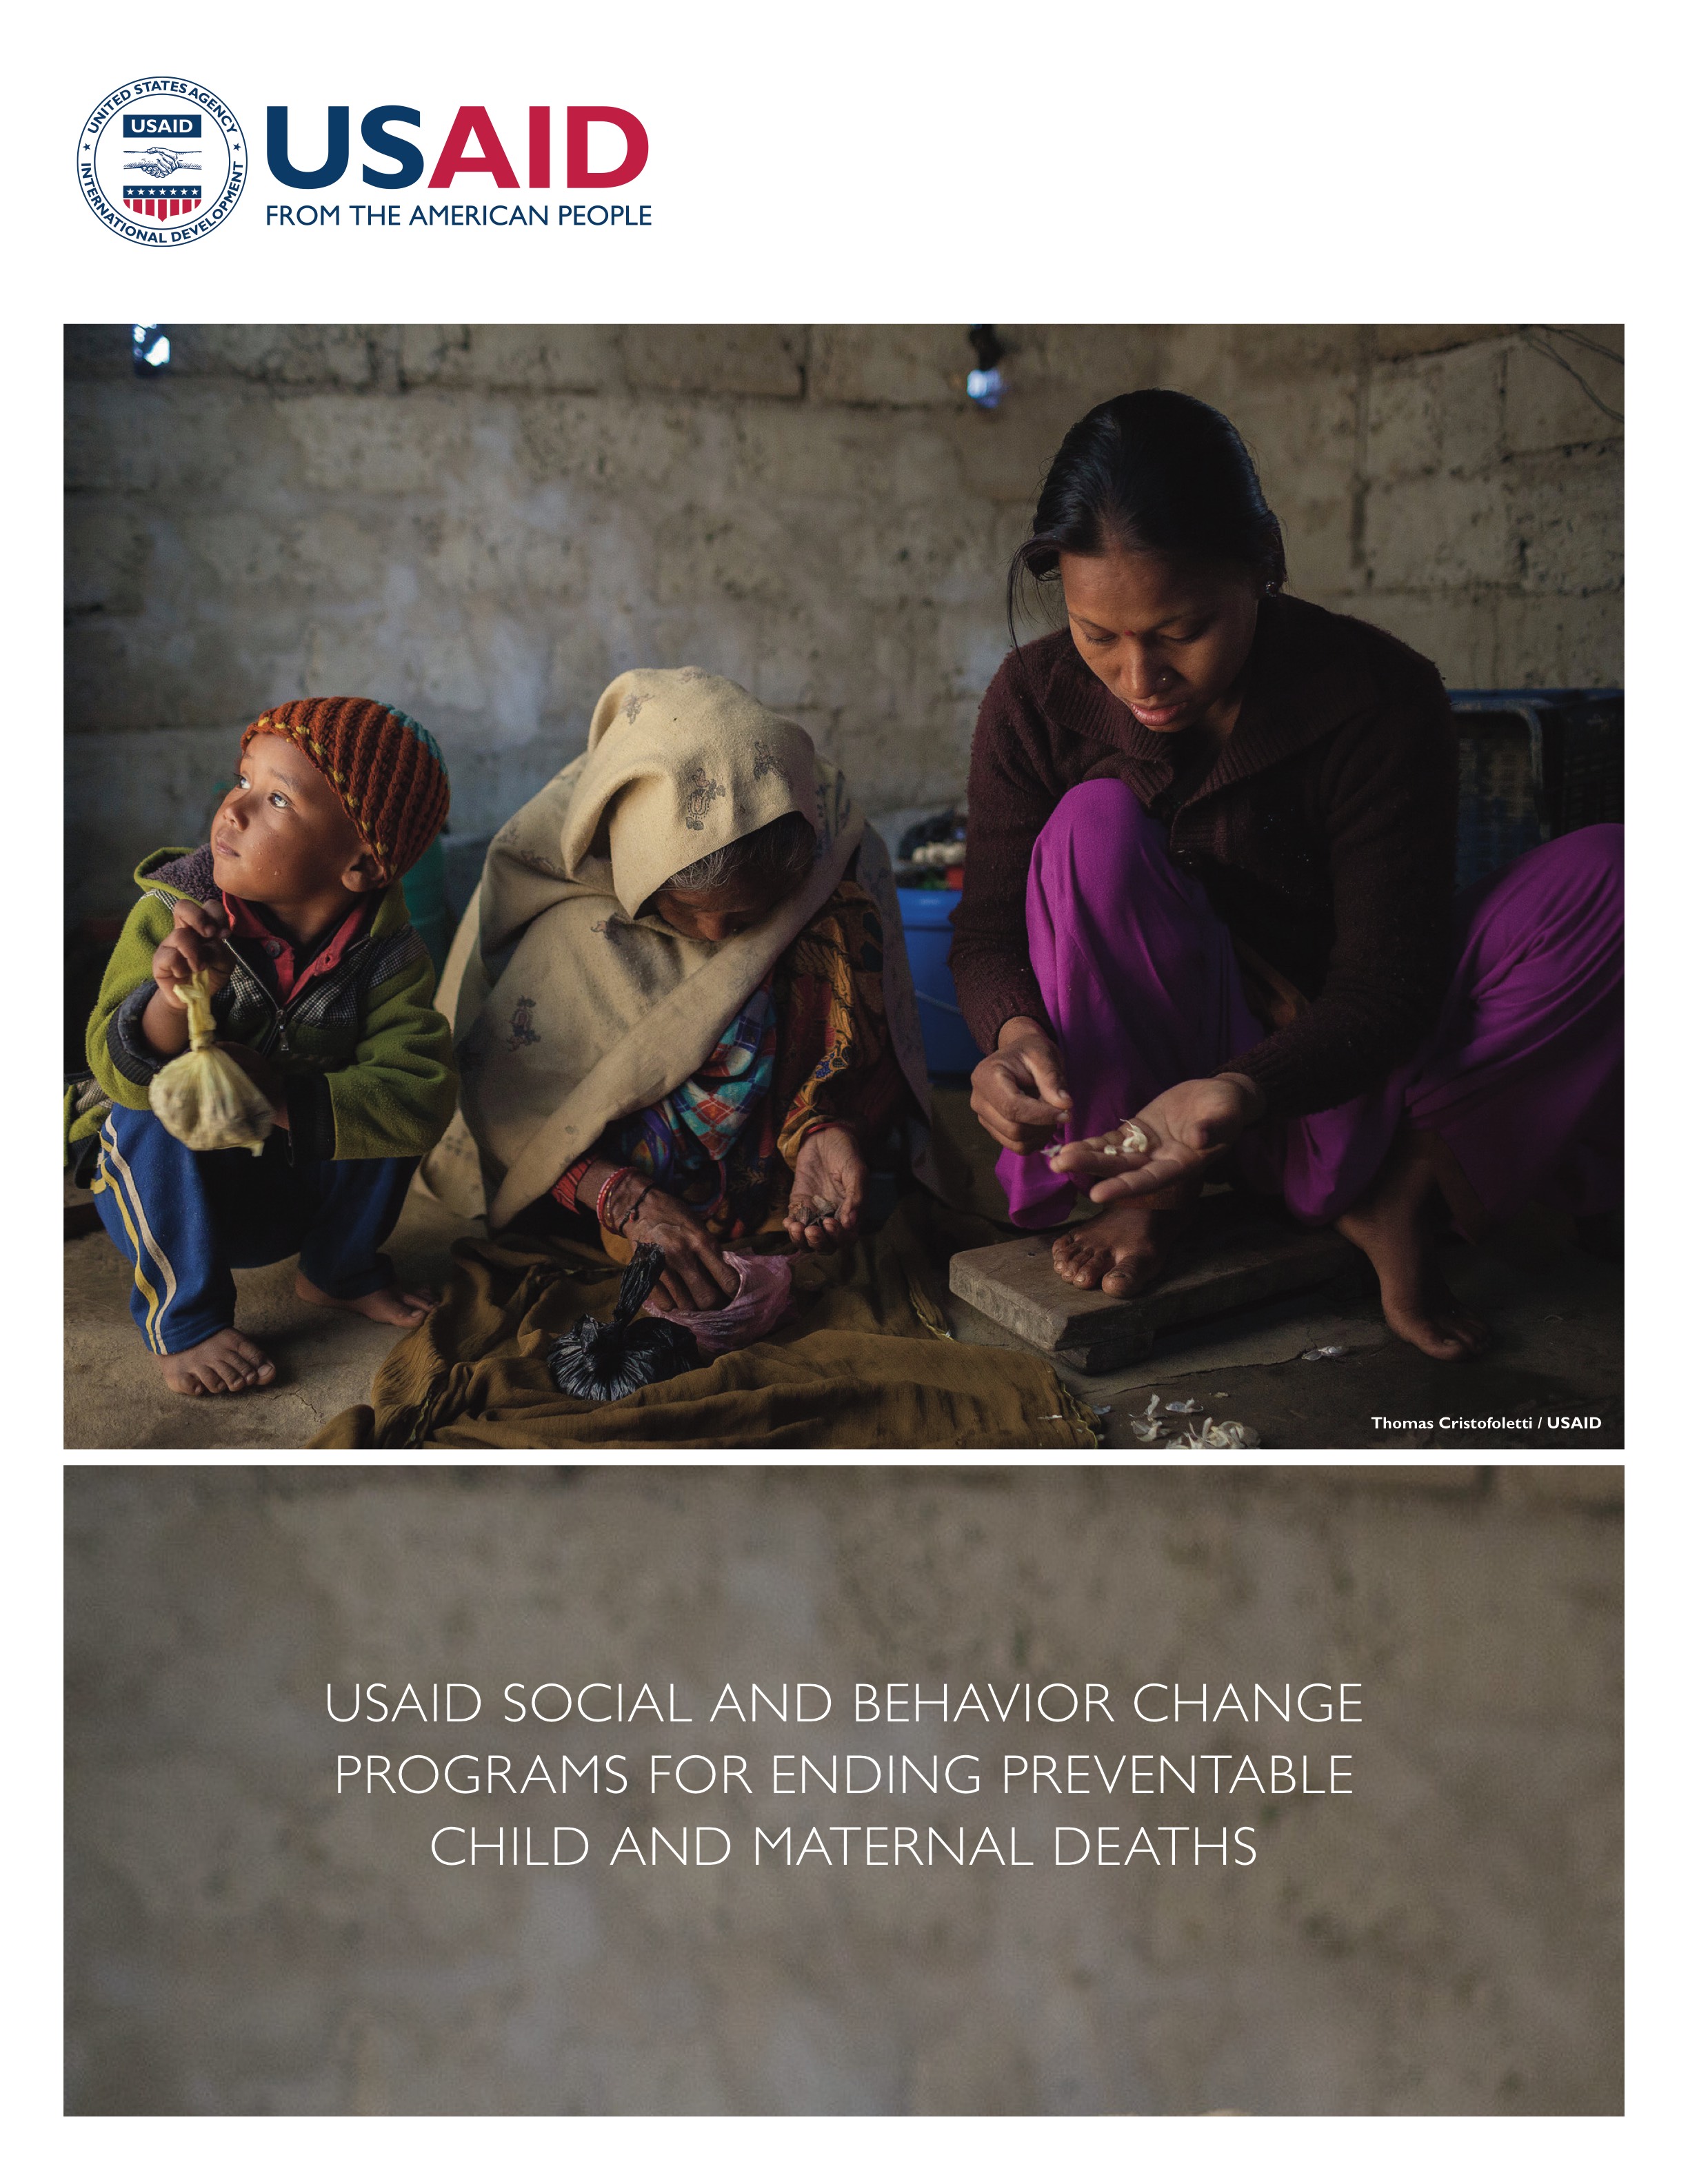 USAID Social and Behavior Change Programs for Ending Preventable and Child and Maternal Deaths